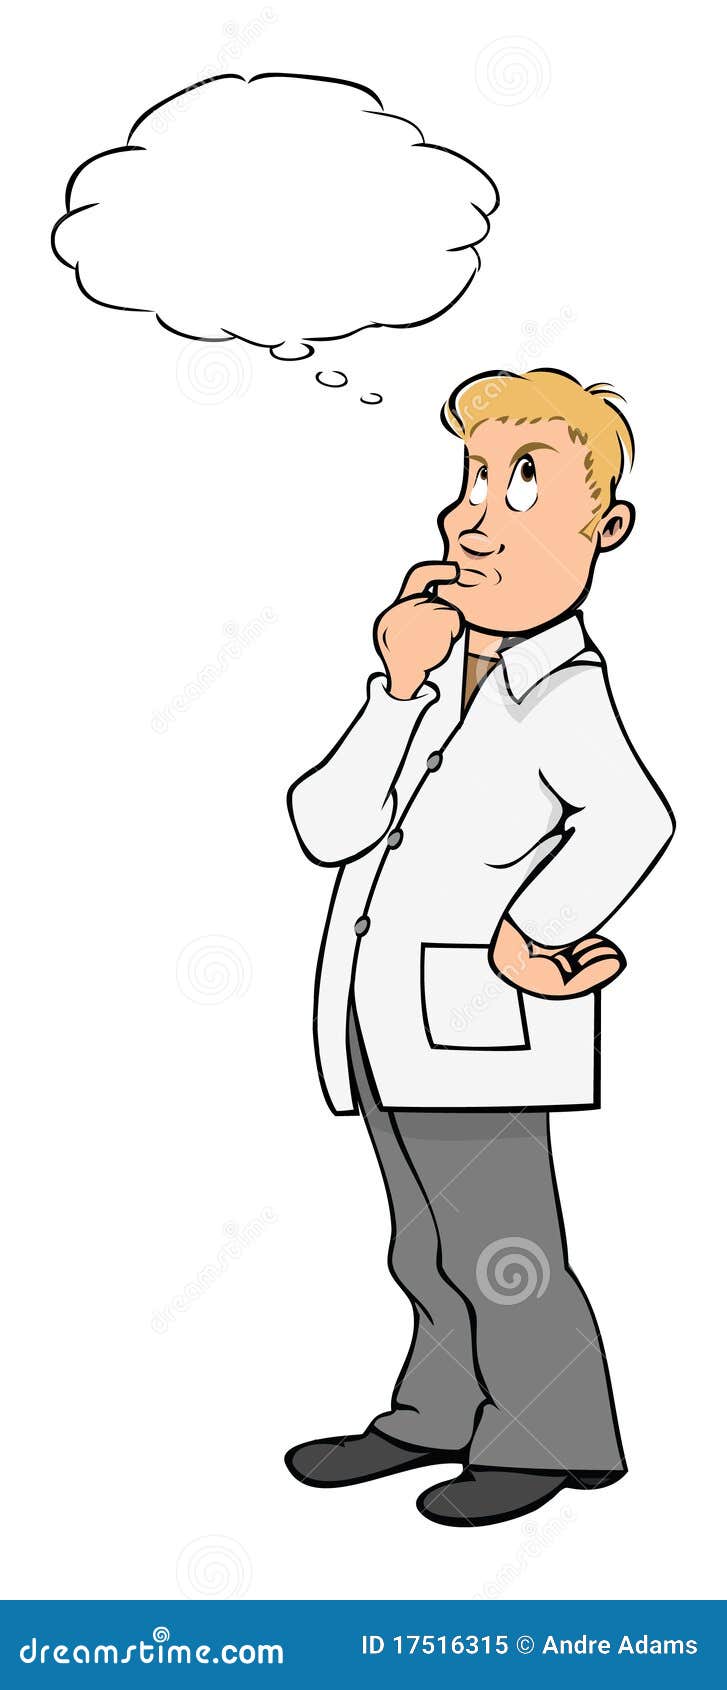 Lab Coat Scientist Thinking Stock Vector - Illustration of thought